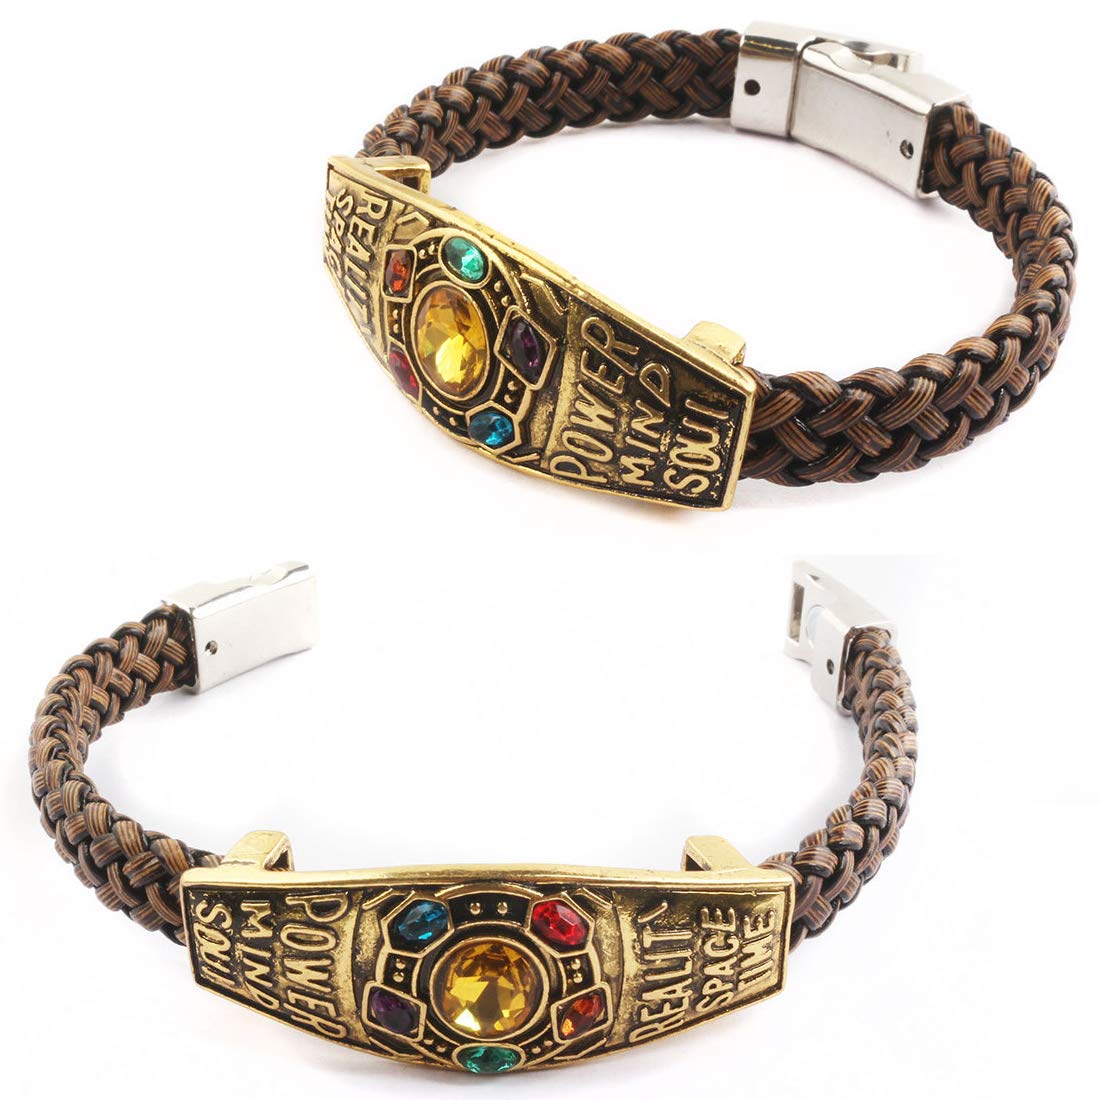 31 Things For Anyone Who's Mad About Marvel | Marvel jewelry, Charm bracelet,  Disney jewelry